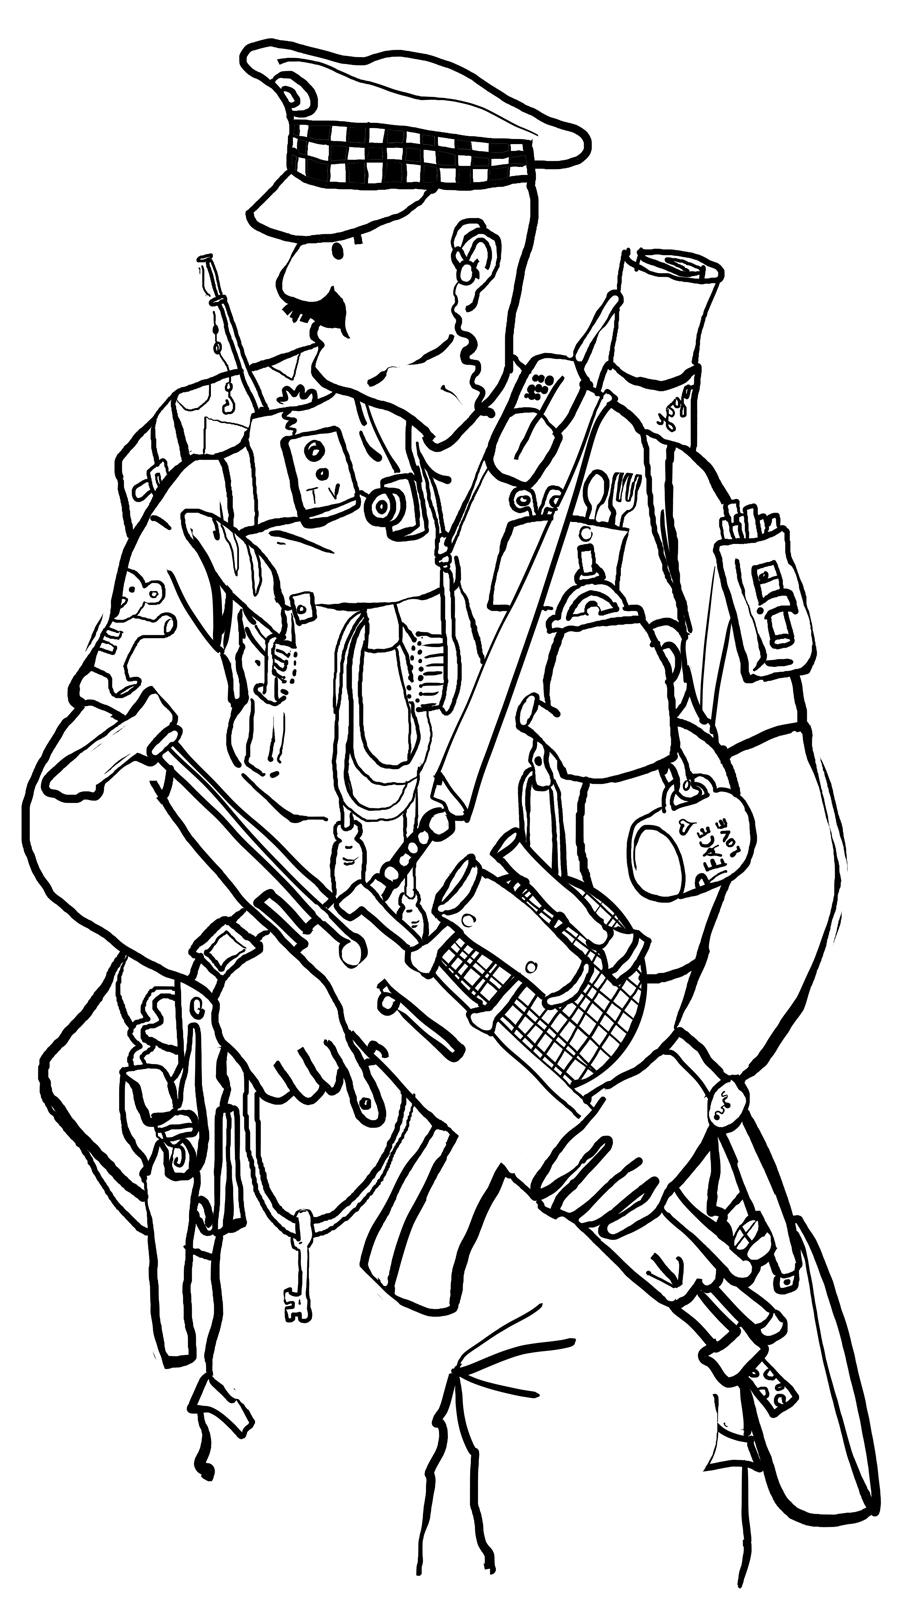 Police Officer Drawing at GetDrawings | Free download